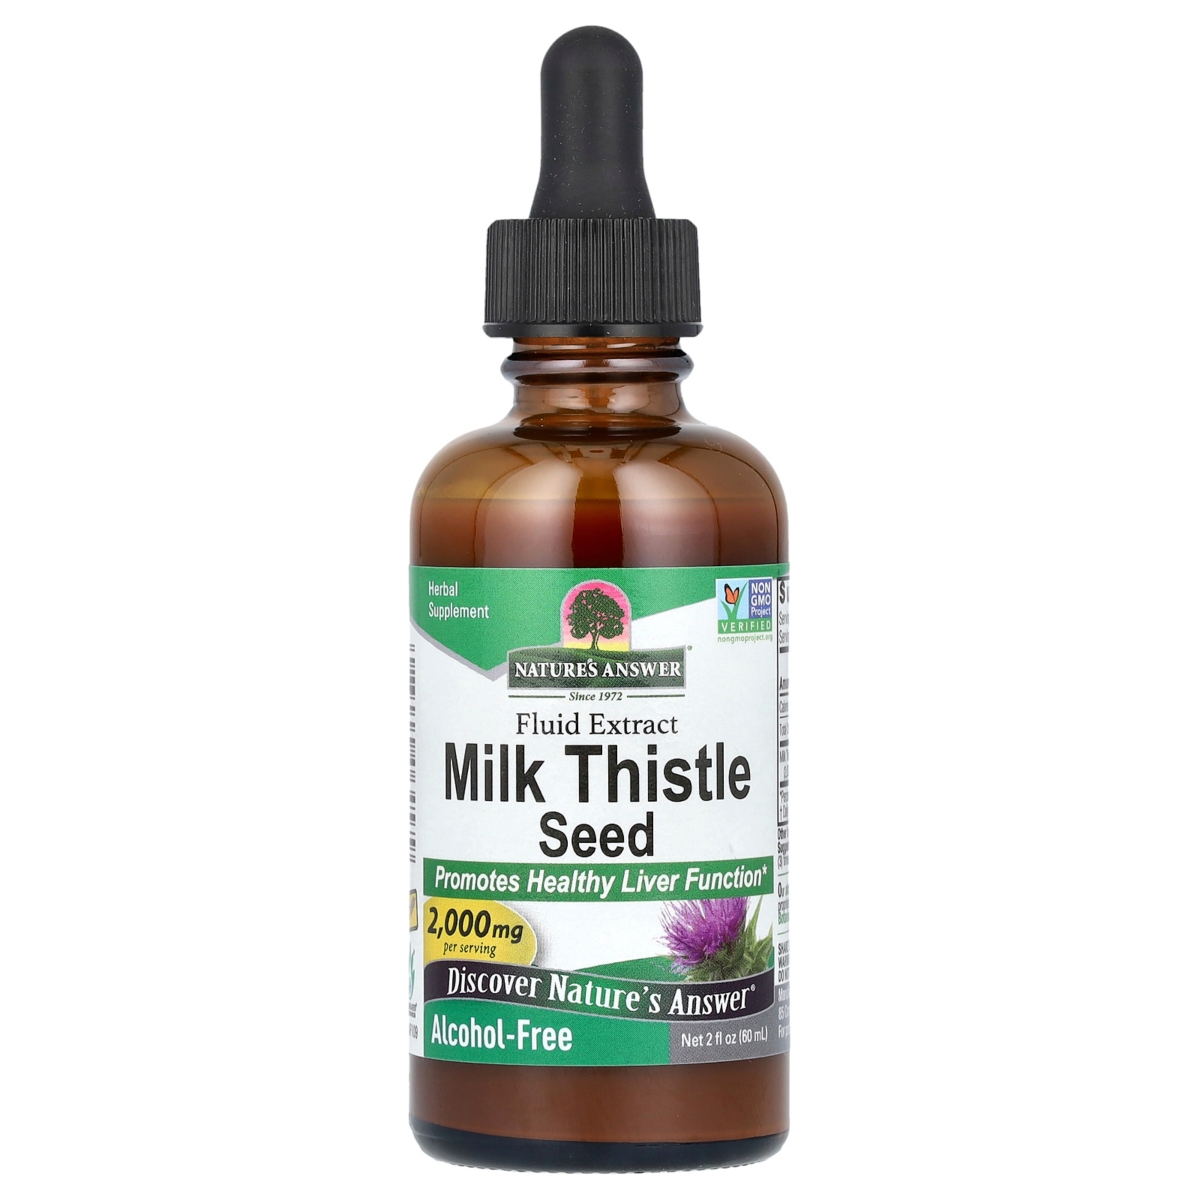 Milk Thistle Seed Fluid Extract 2 000 mg - 2 fl oz (60 ml) - Assorted Pre-pack (See Table